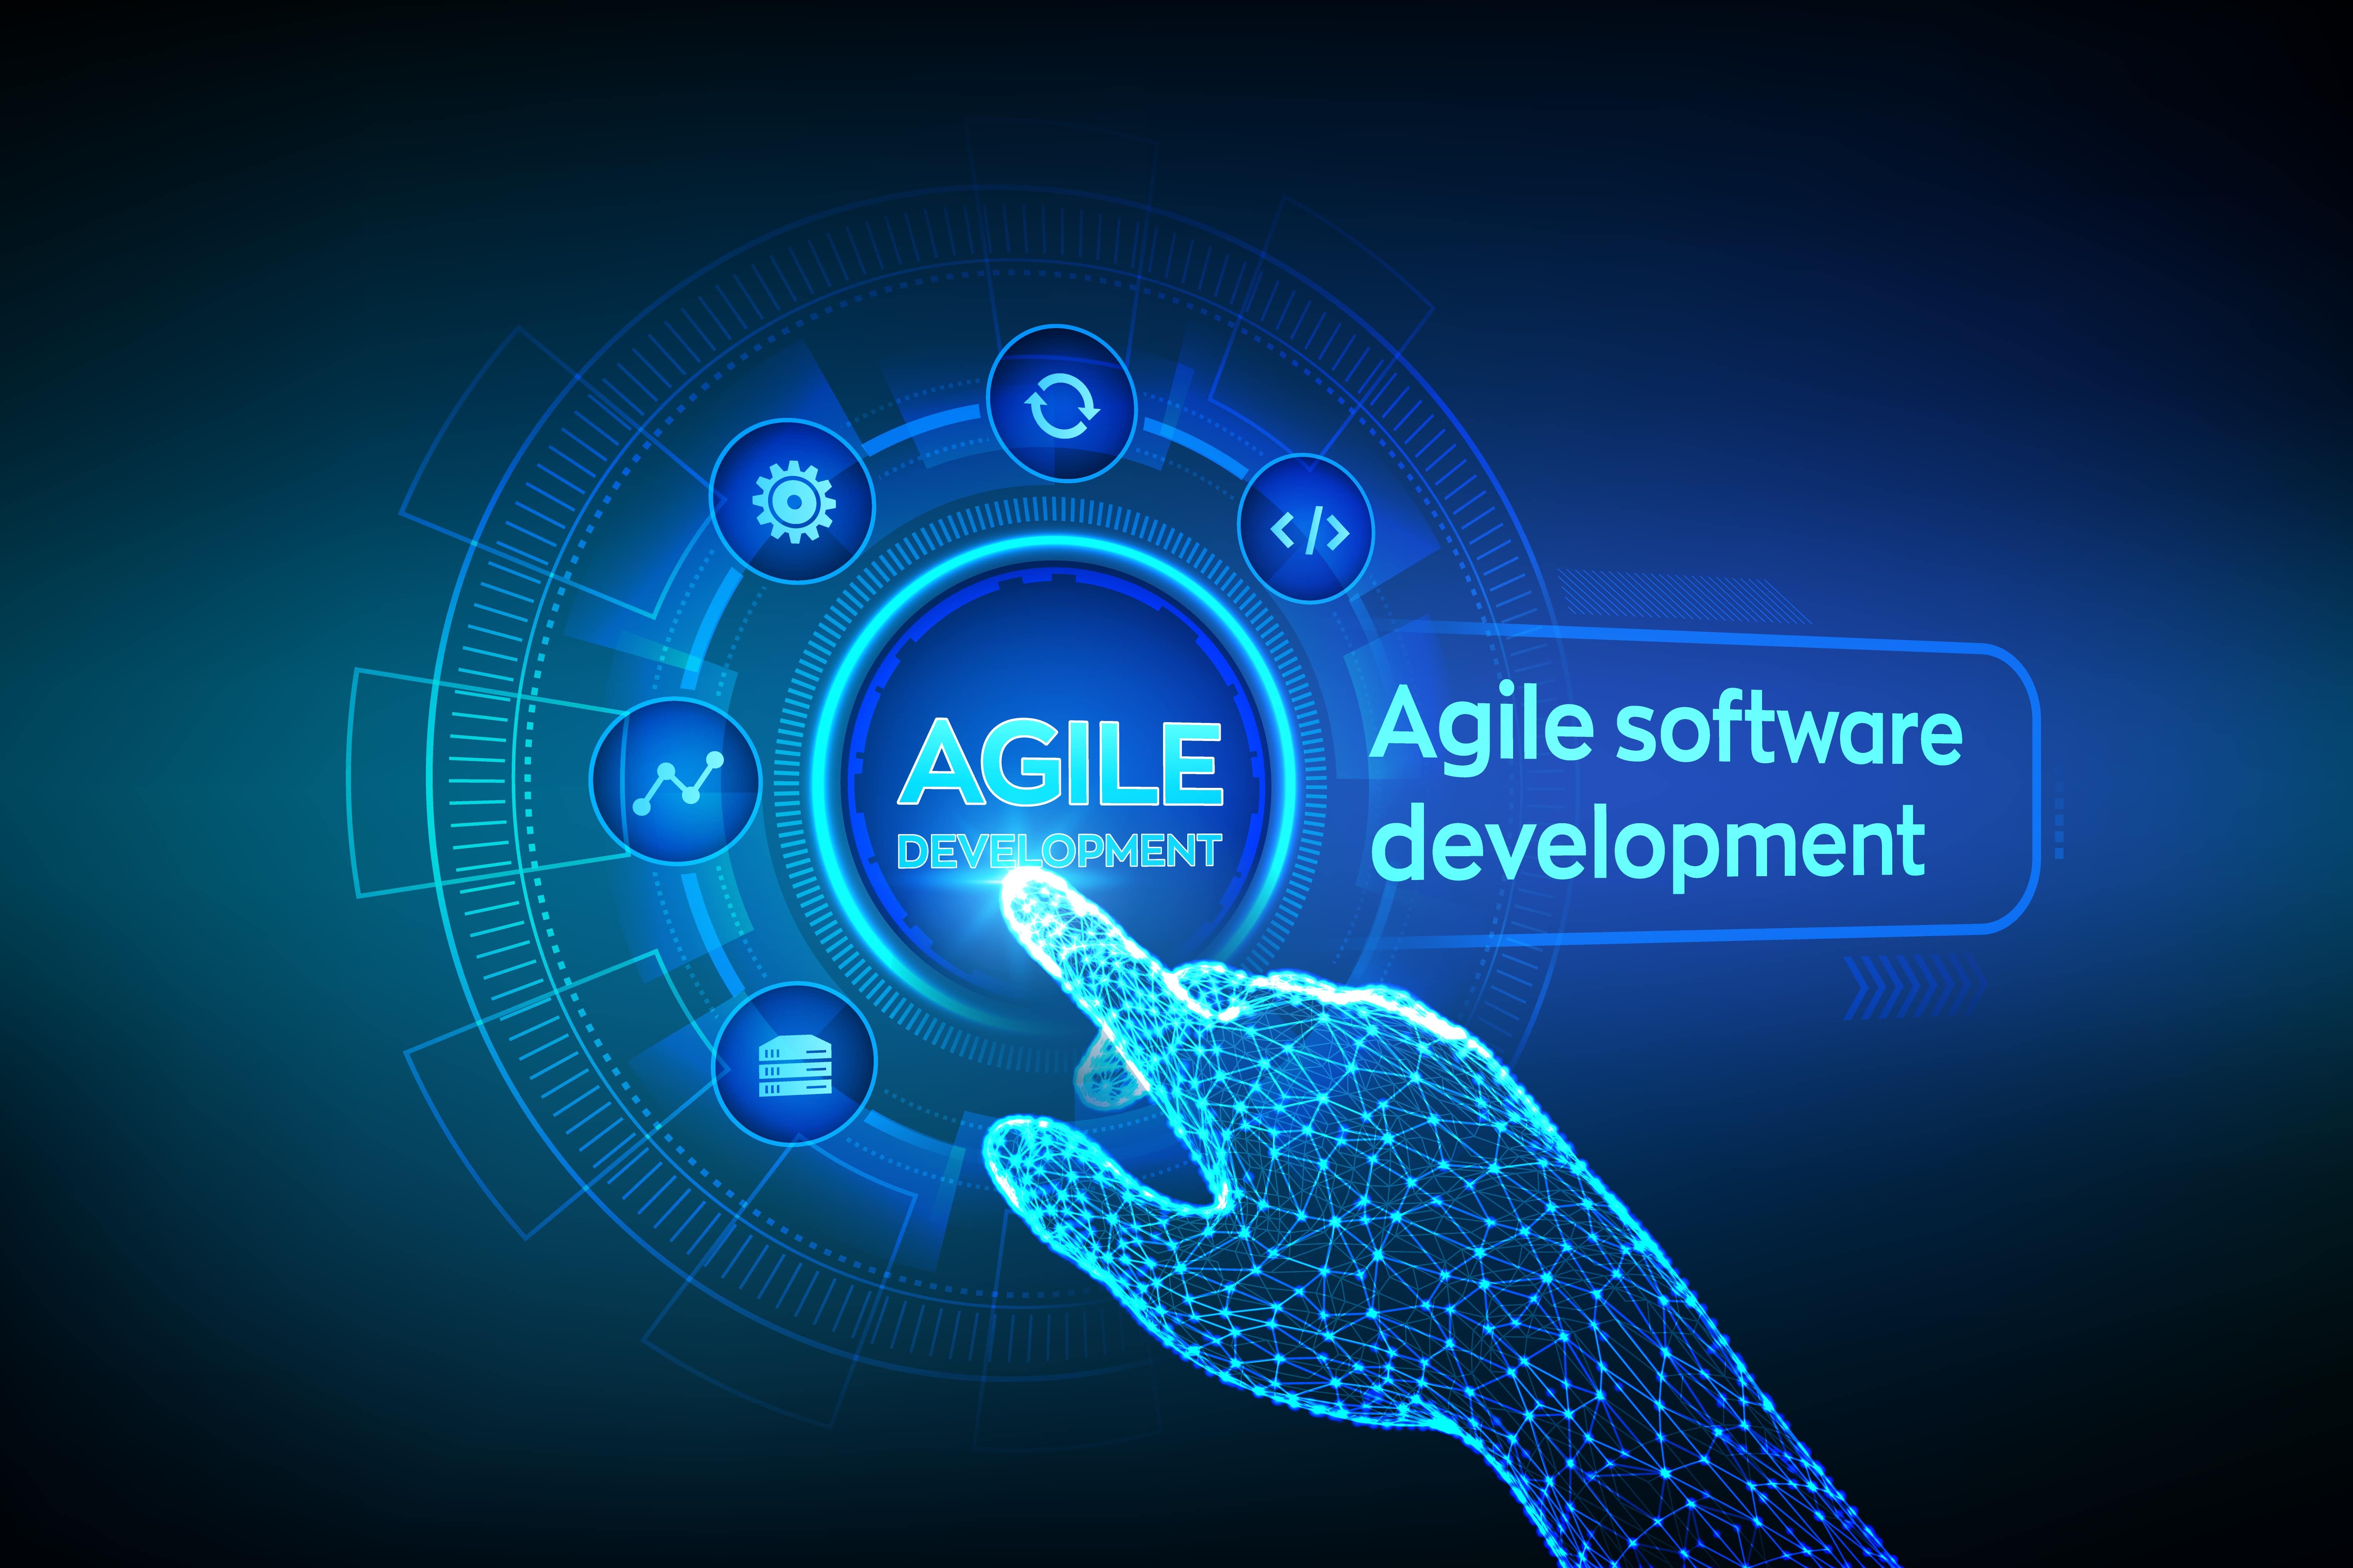 Why you should use agile software development?